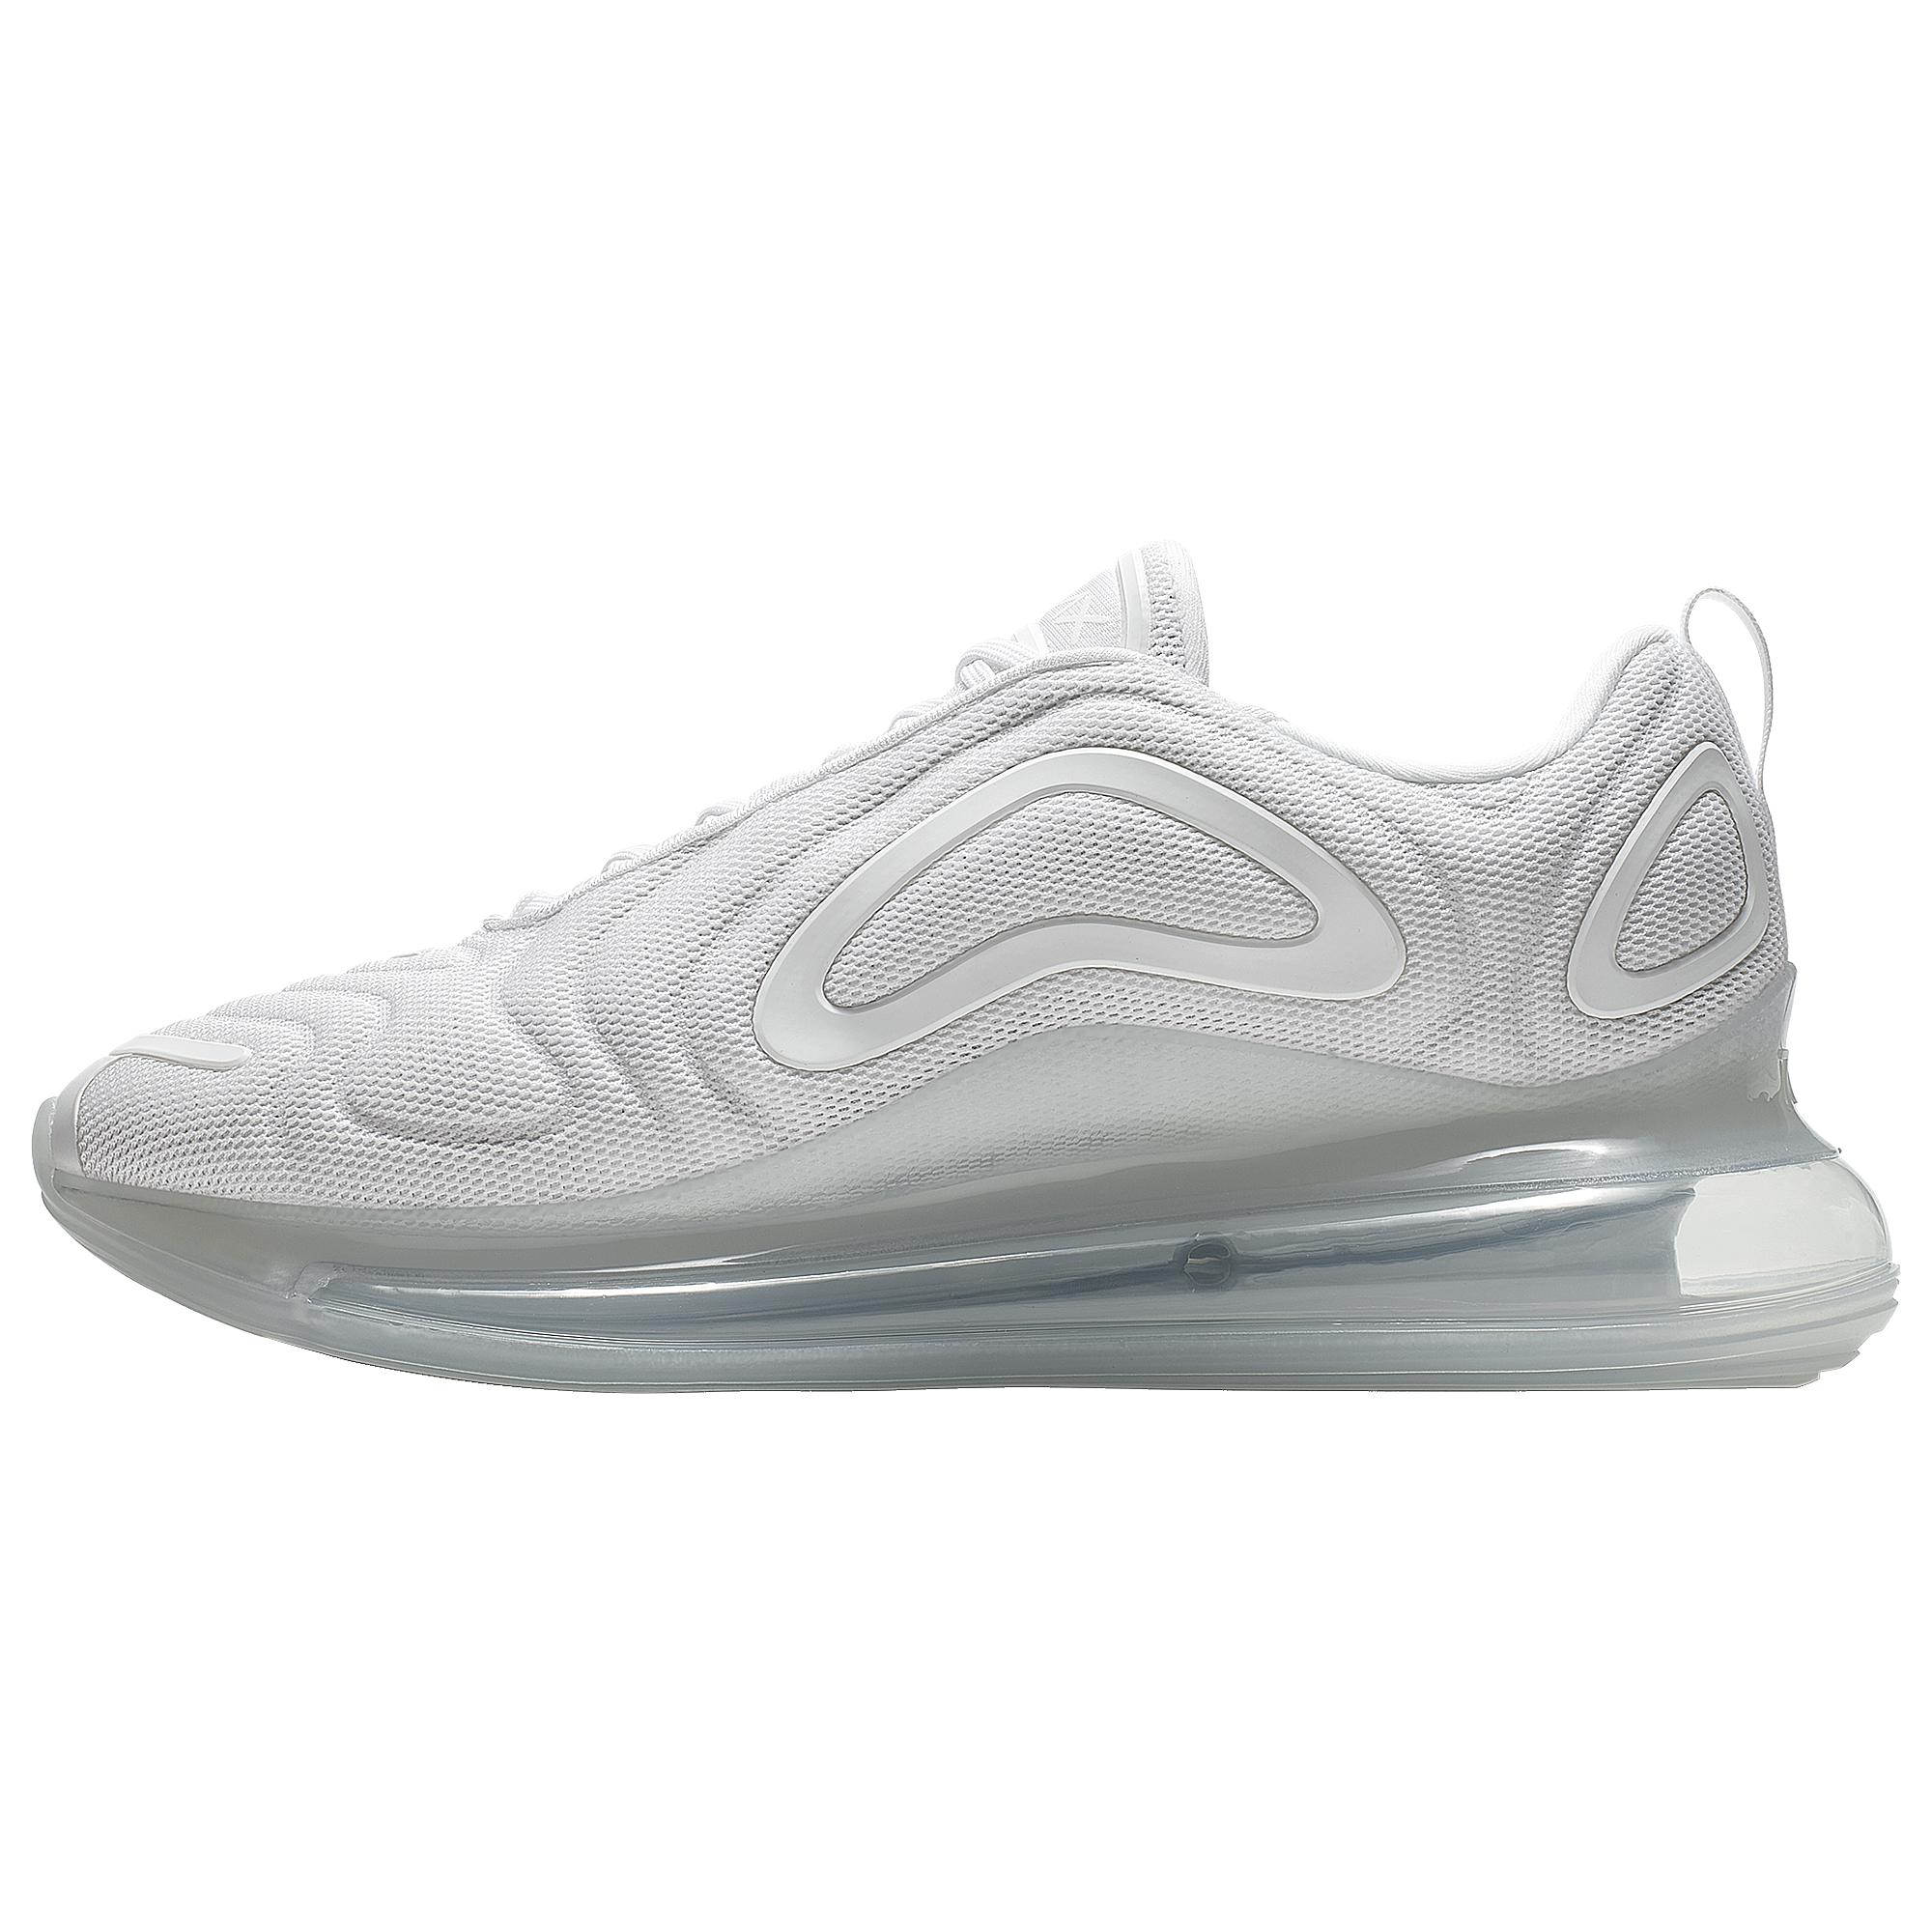 Nike Synthetic Air Max 720 - Shoes in White/White (White) for Men | Lyst